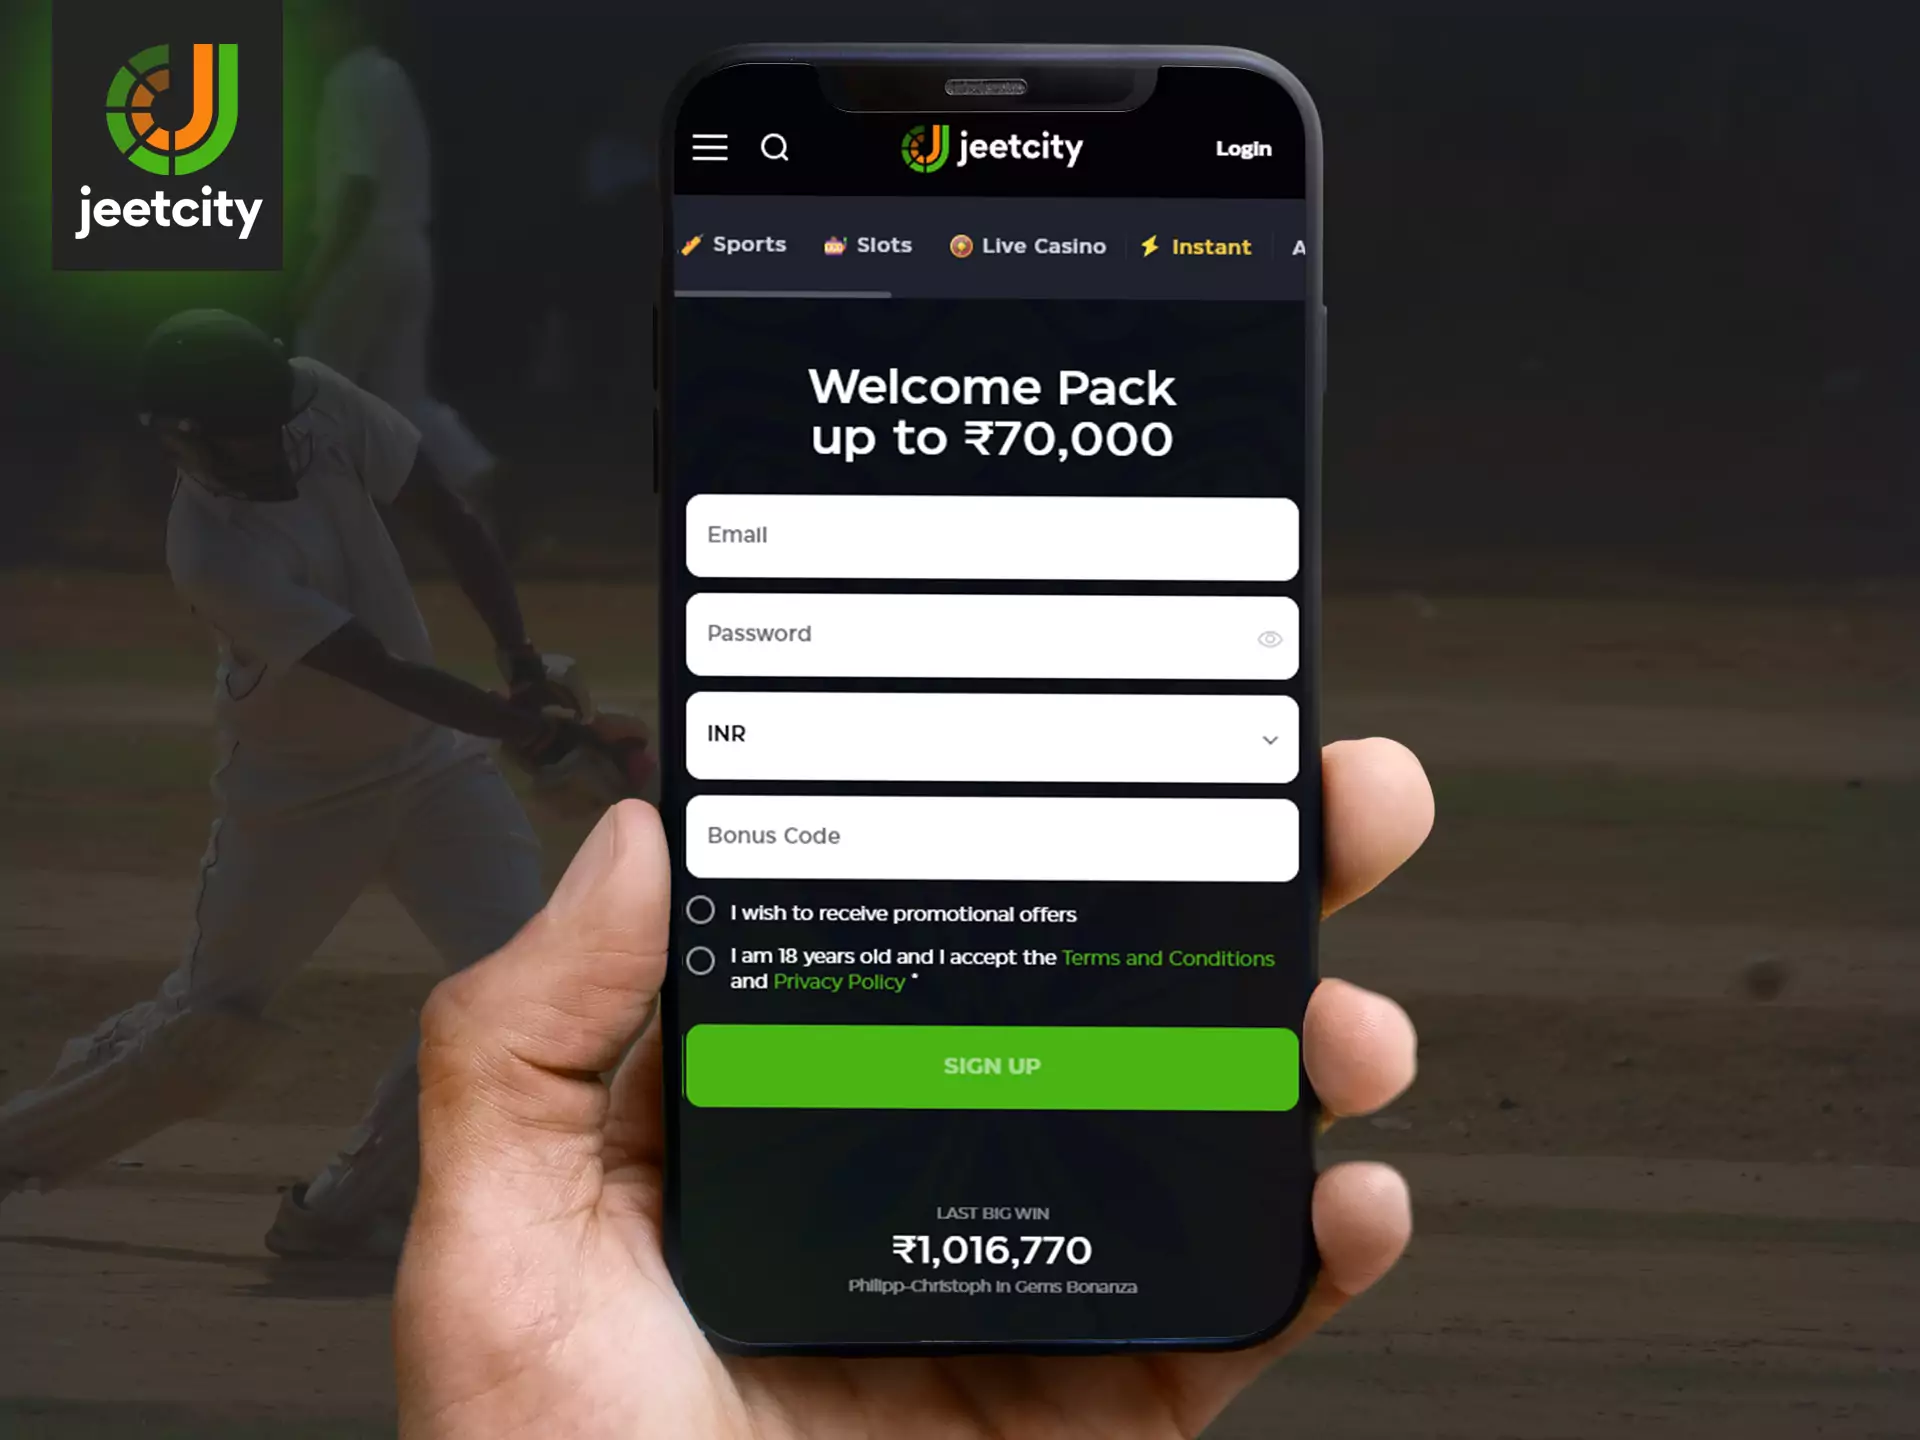 Go through a simple registration on JeetCity to make bets on sports and play at the casino.